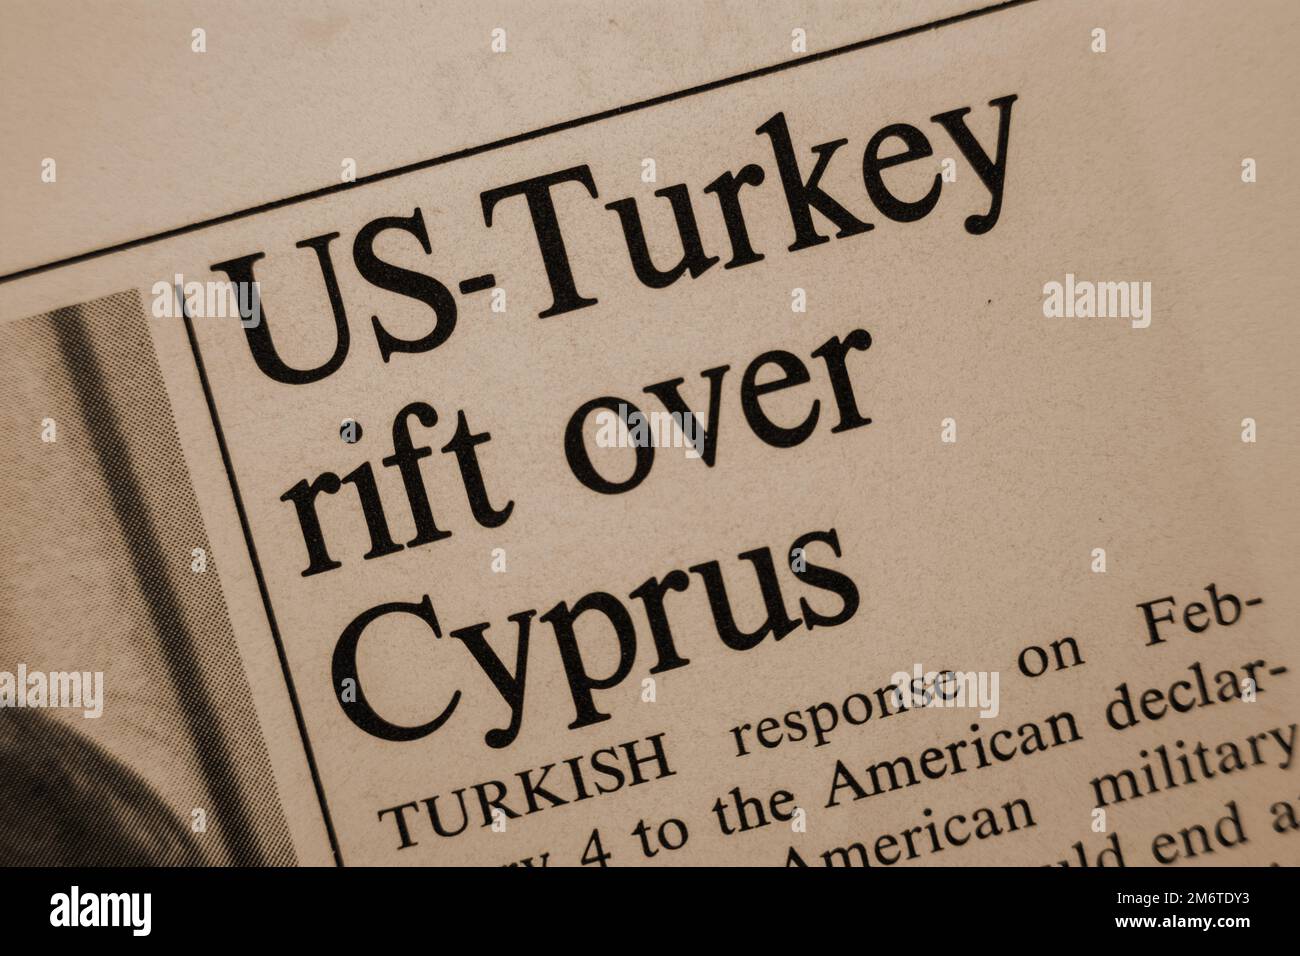 US - Turkey rift over Cyprus - news story from 1975 newspaper headline article title in - sepia Stock Photo